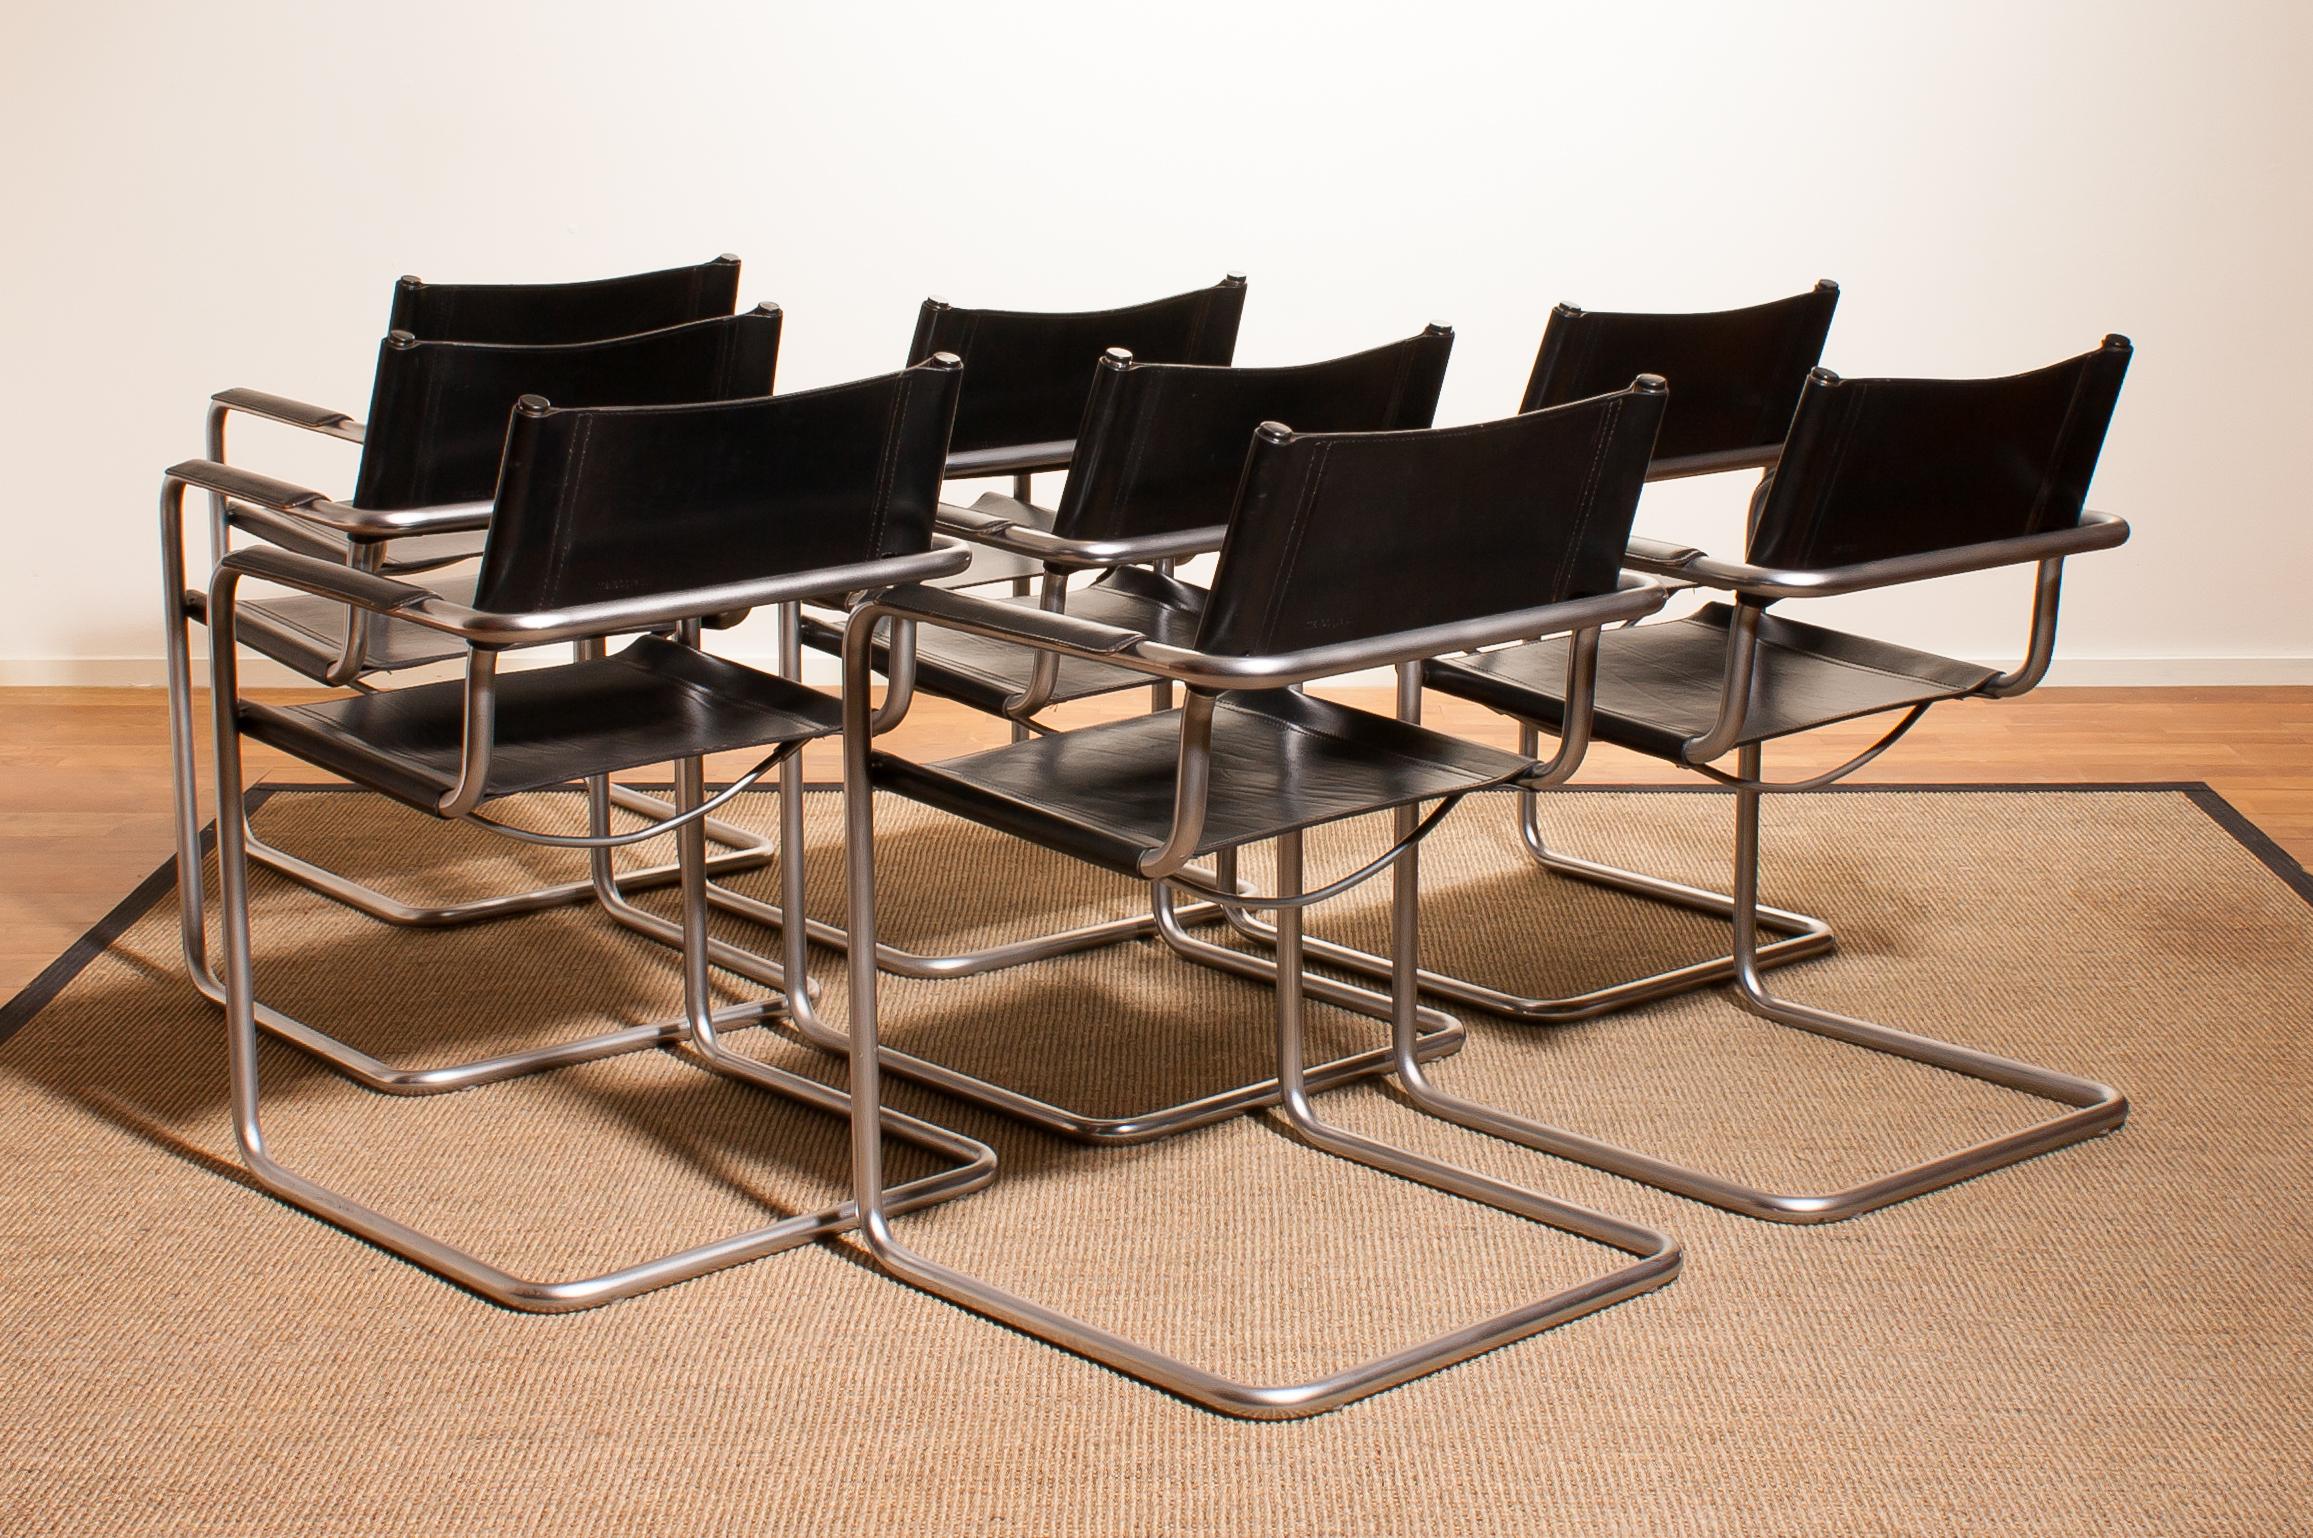 A beautiful set of eight dining chairs made by Matteo Grassi, Italy.
The chairs have tubular titanium look steel frames with sturdy black leather seating and back and armrest.
They are signed on the back of the backrest.
The chairs are in a very